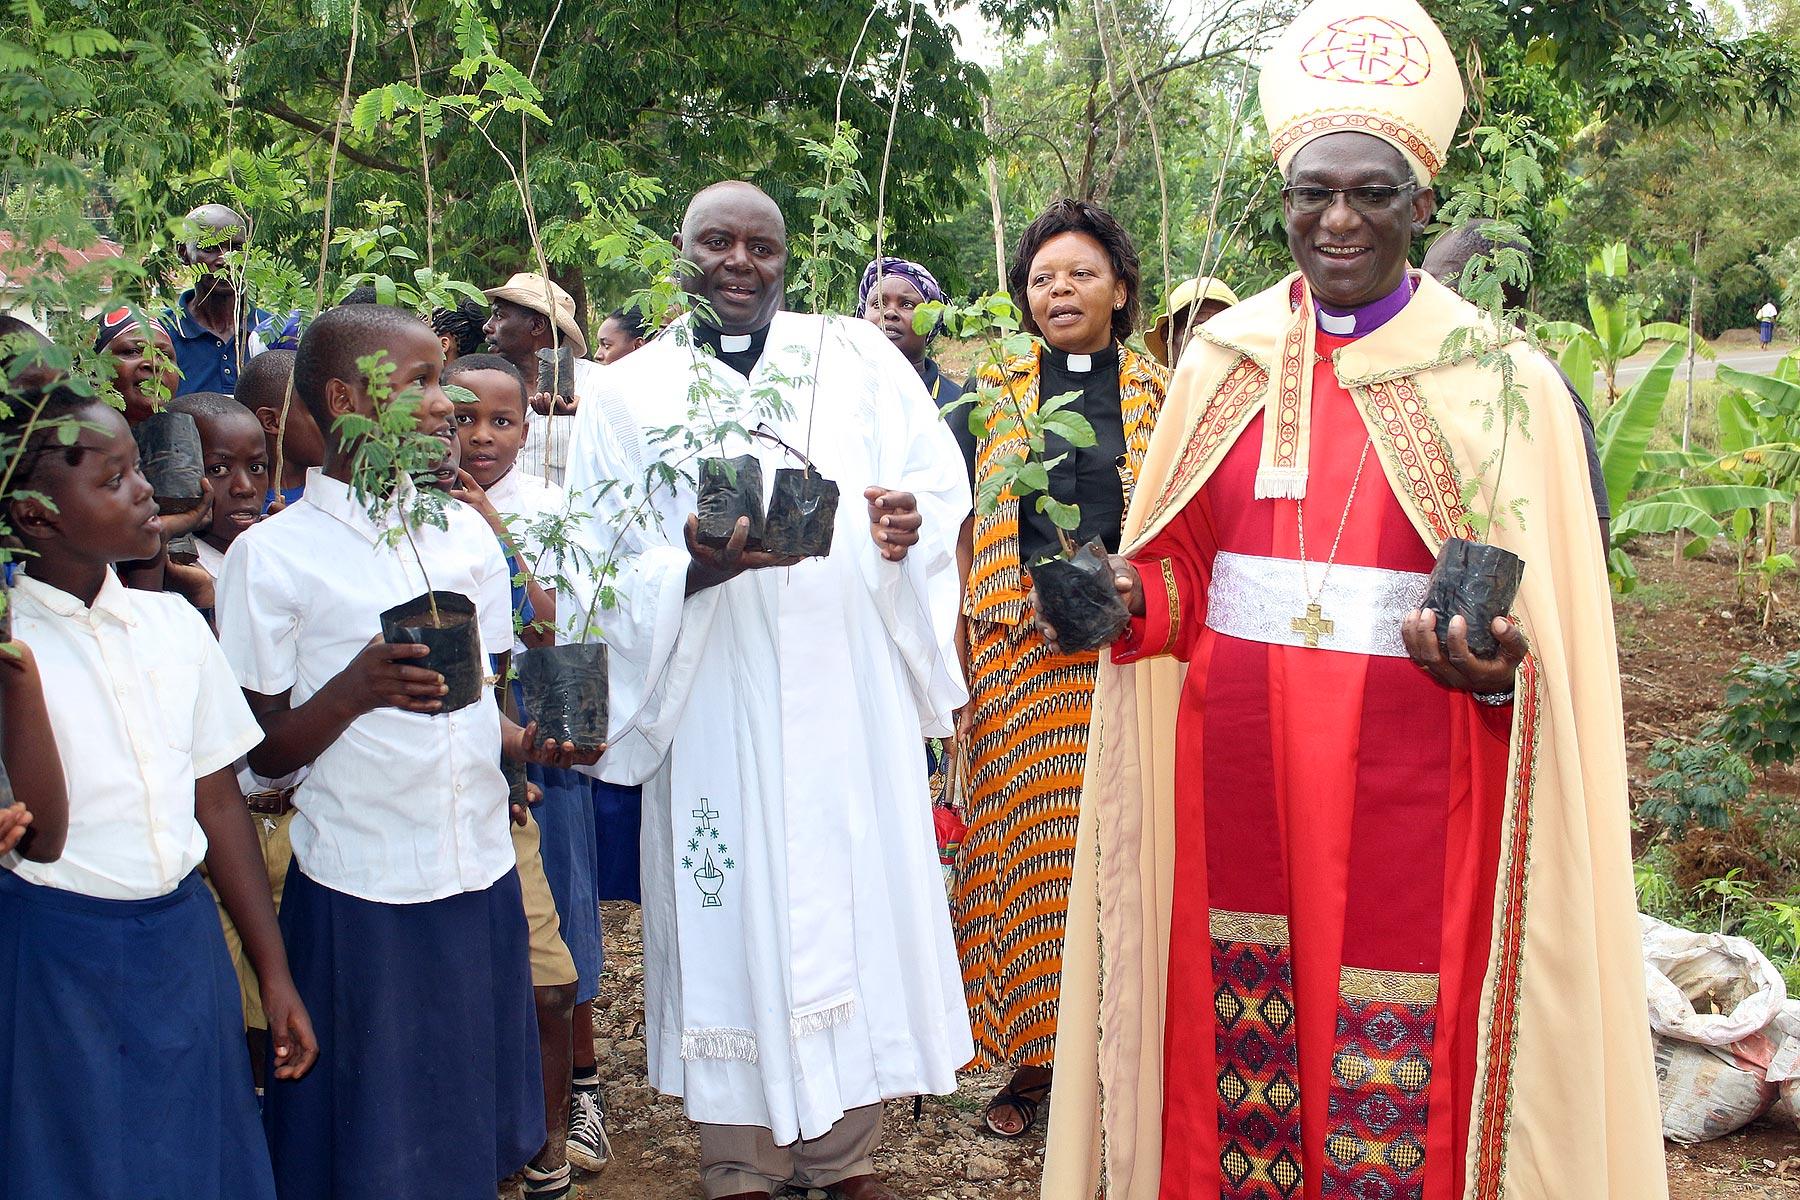 Planting trees has become part of church life in ELCT: (from the right) Bishop Fredrik Shoo, Rev. Faustine Kahwa, Rev. Solomon Massawe and students attending confirmation classes preparing for a tree planting in Tanzania's Northern Diocese. Photo: ELCT